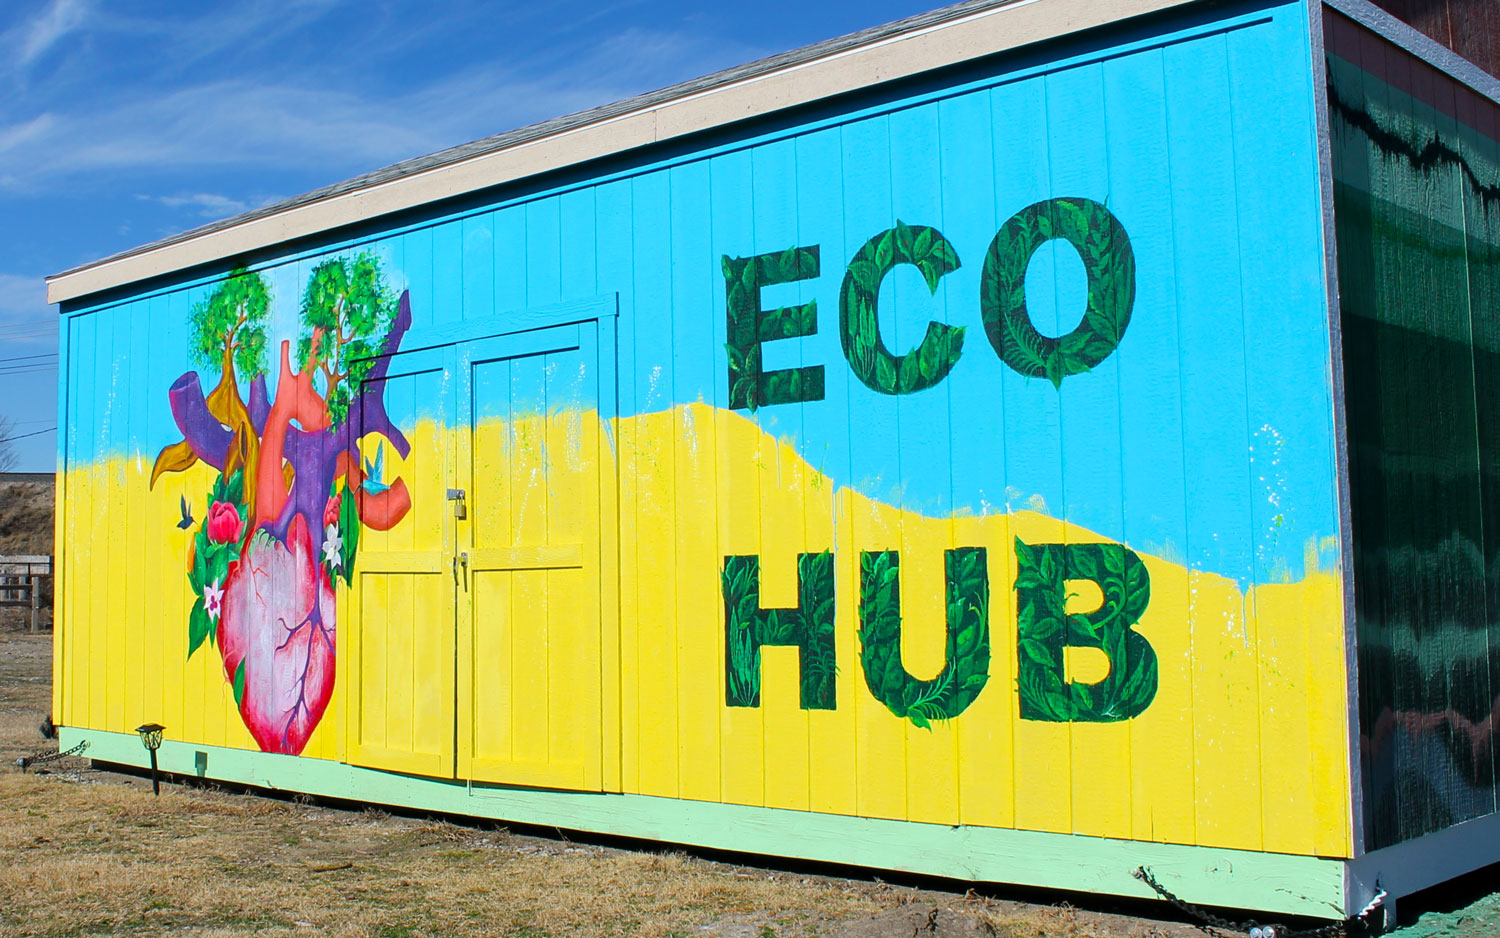 The side of a single-story gabled-roof building. The top half of the background is painted light blue, the bottom half is painted yellow, with a blurred boundry between them. To the left is a human heart, from which sprout trees and flowers that have attracted humingbirds. To the right are the words “ECO HUB” in letters made of greenery.